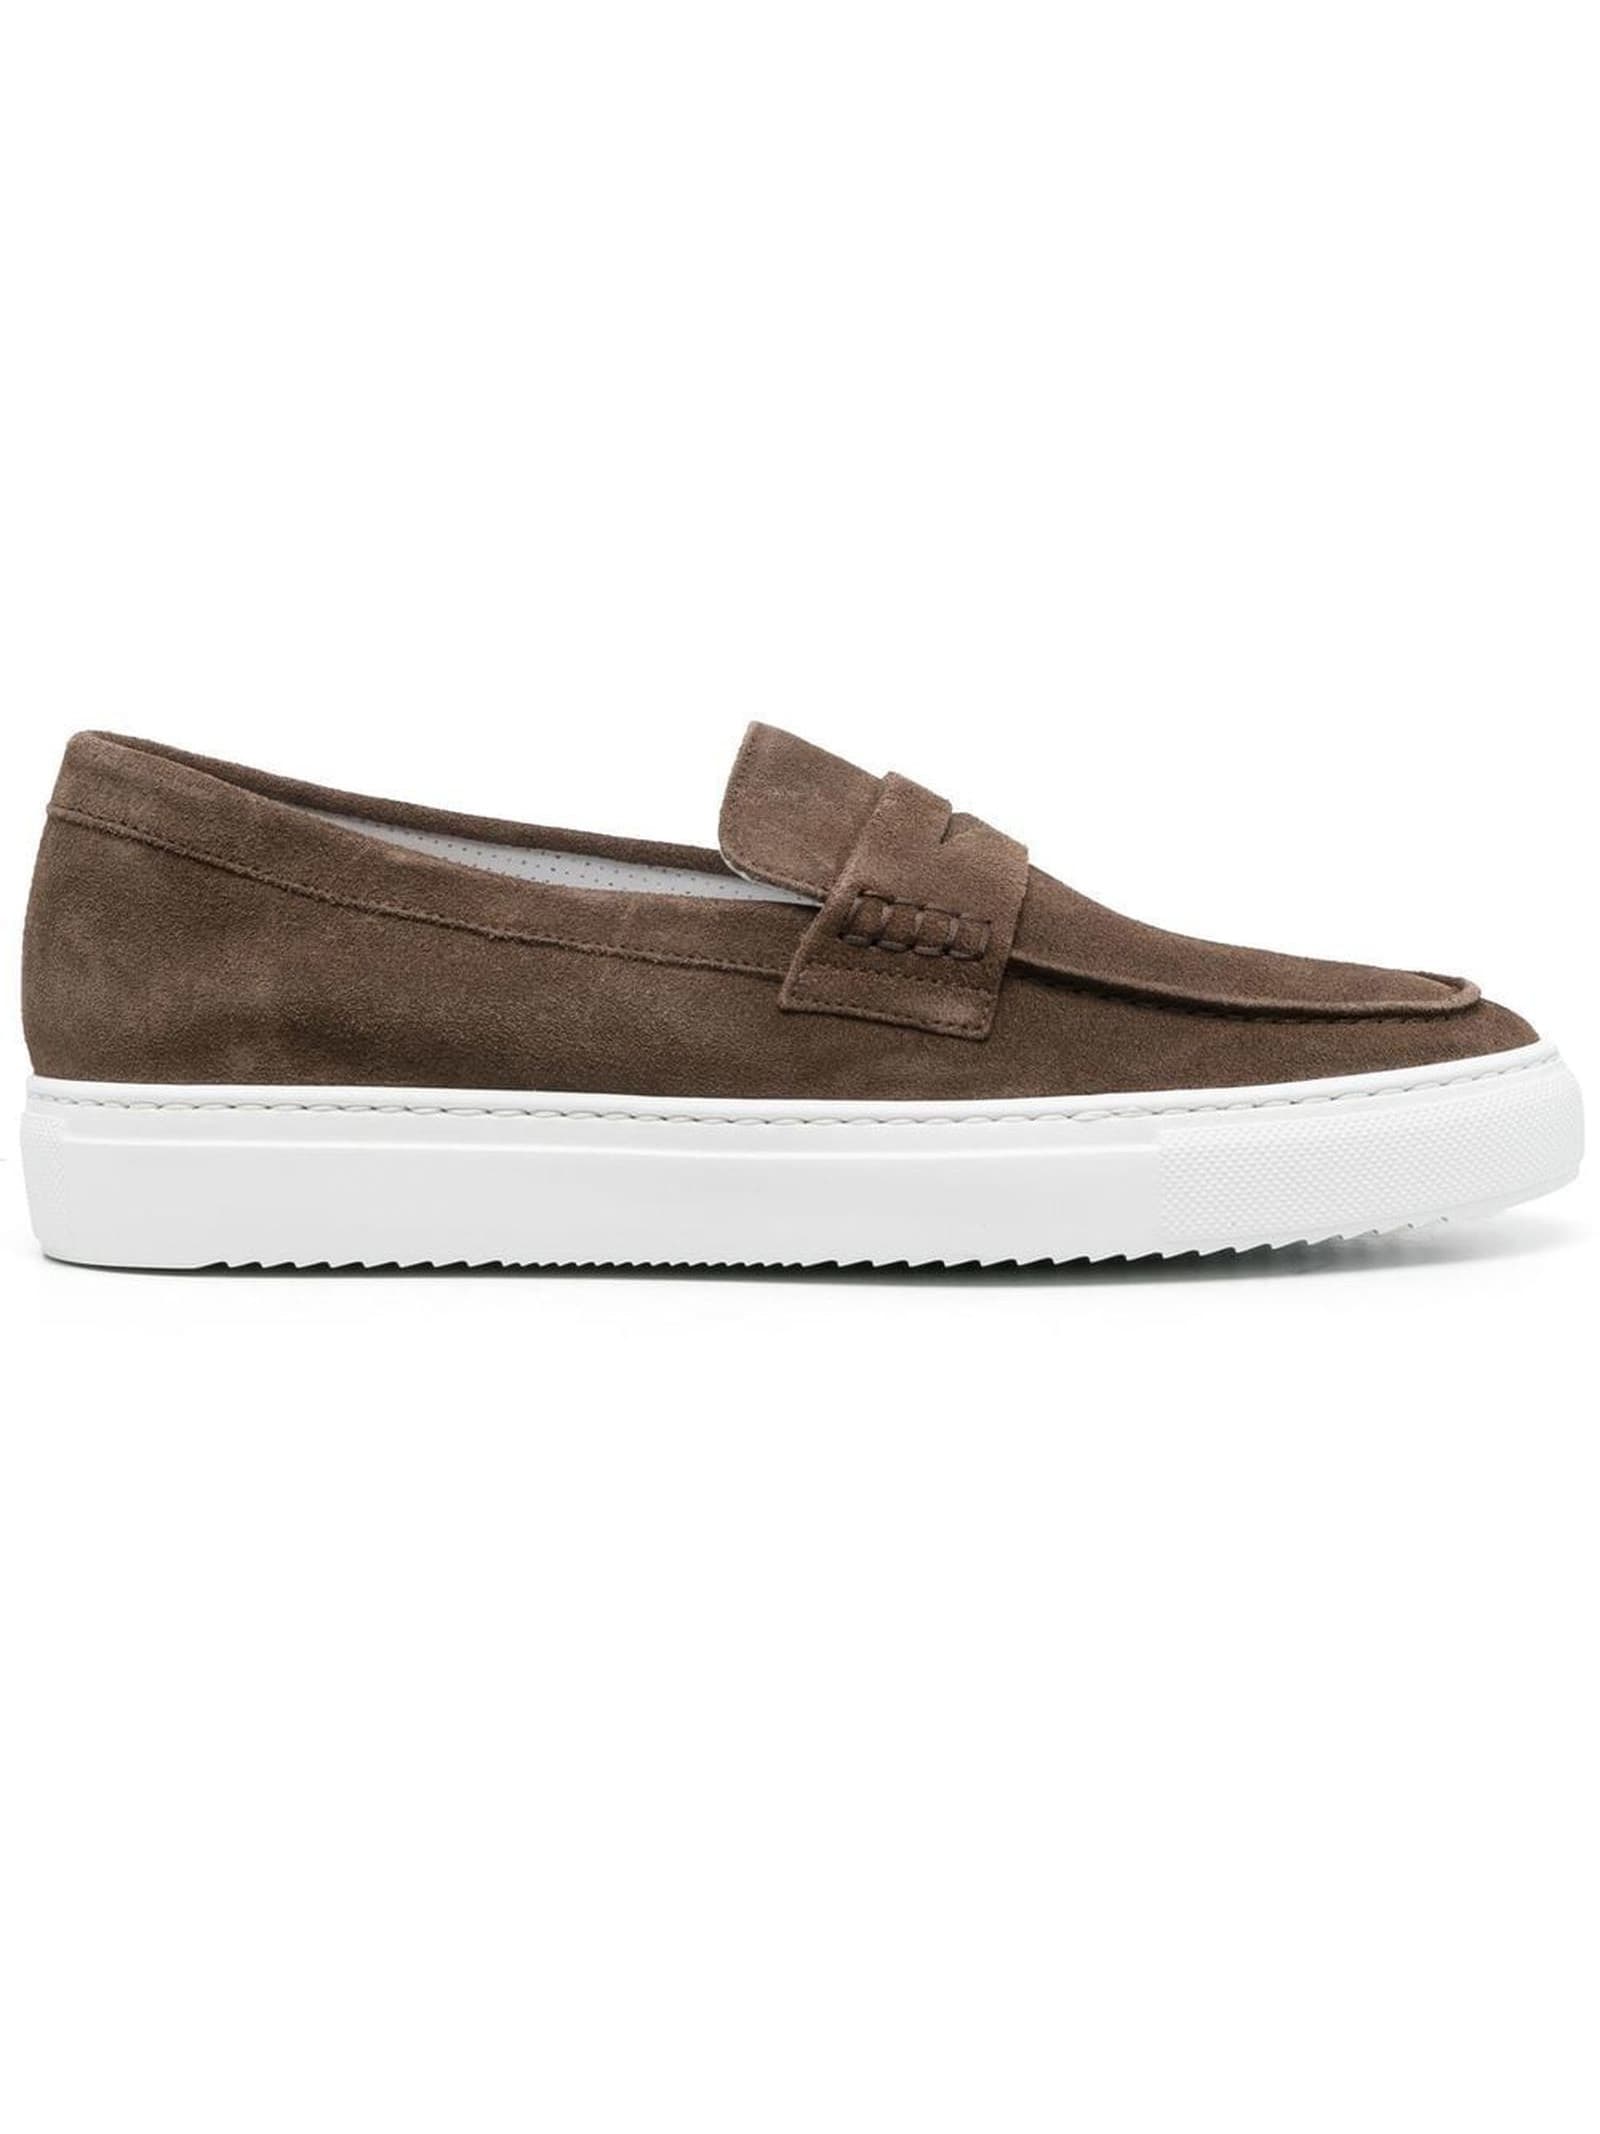 DOUCAL'S BROWN CALF SUEDE LOAFERS